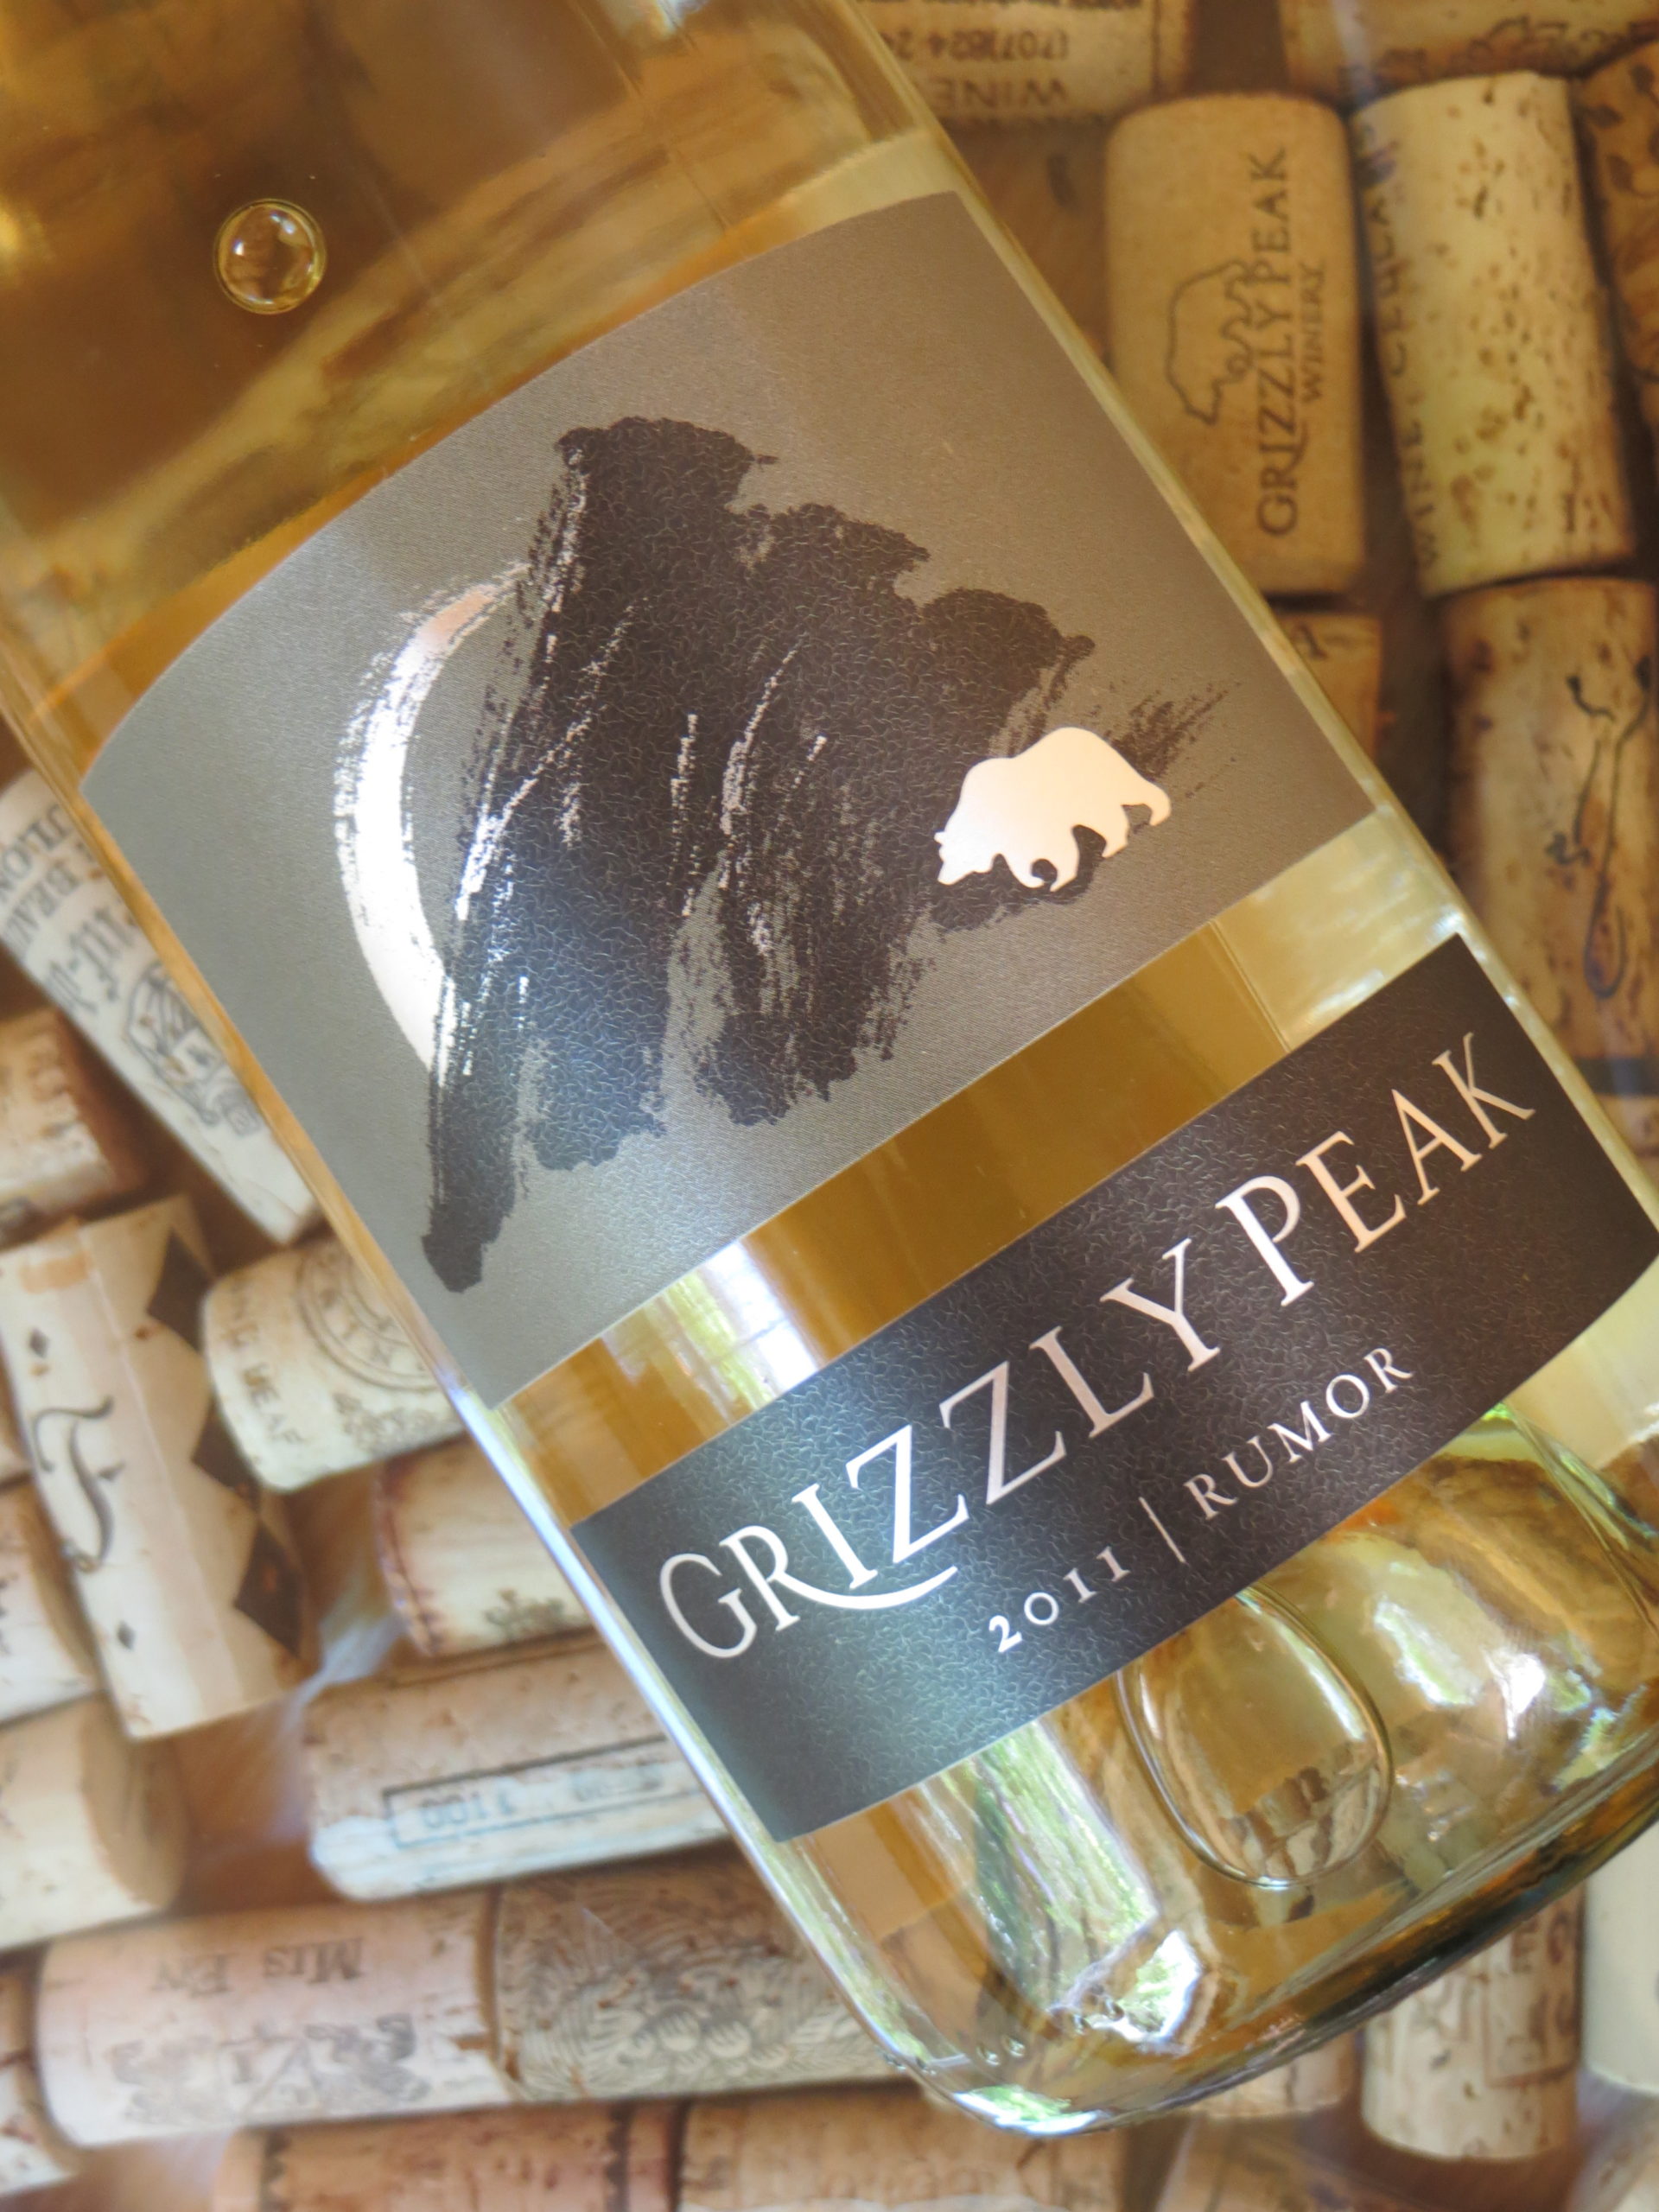 Grizzly Peak Winery